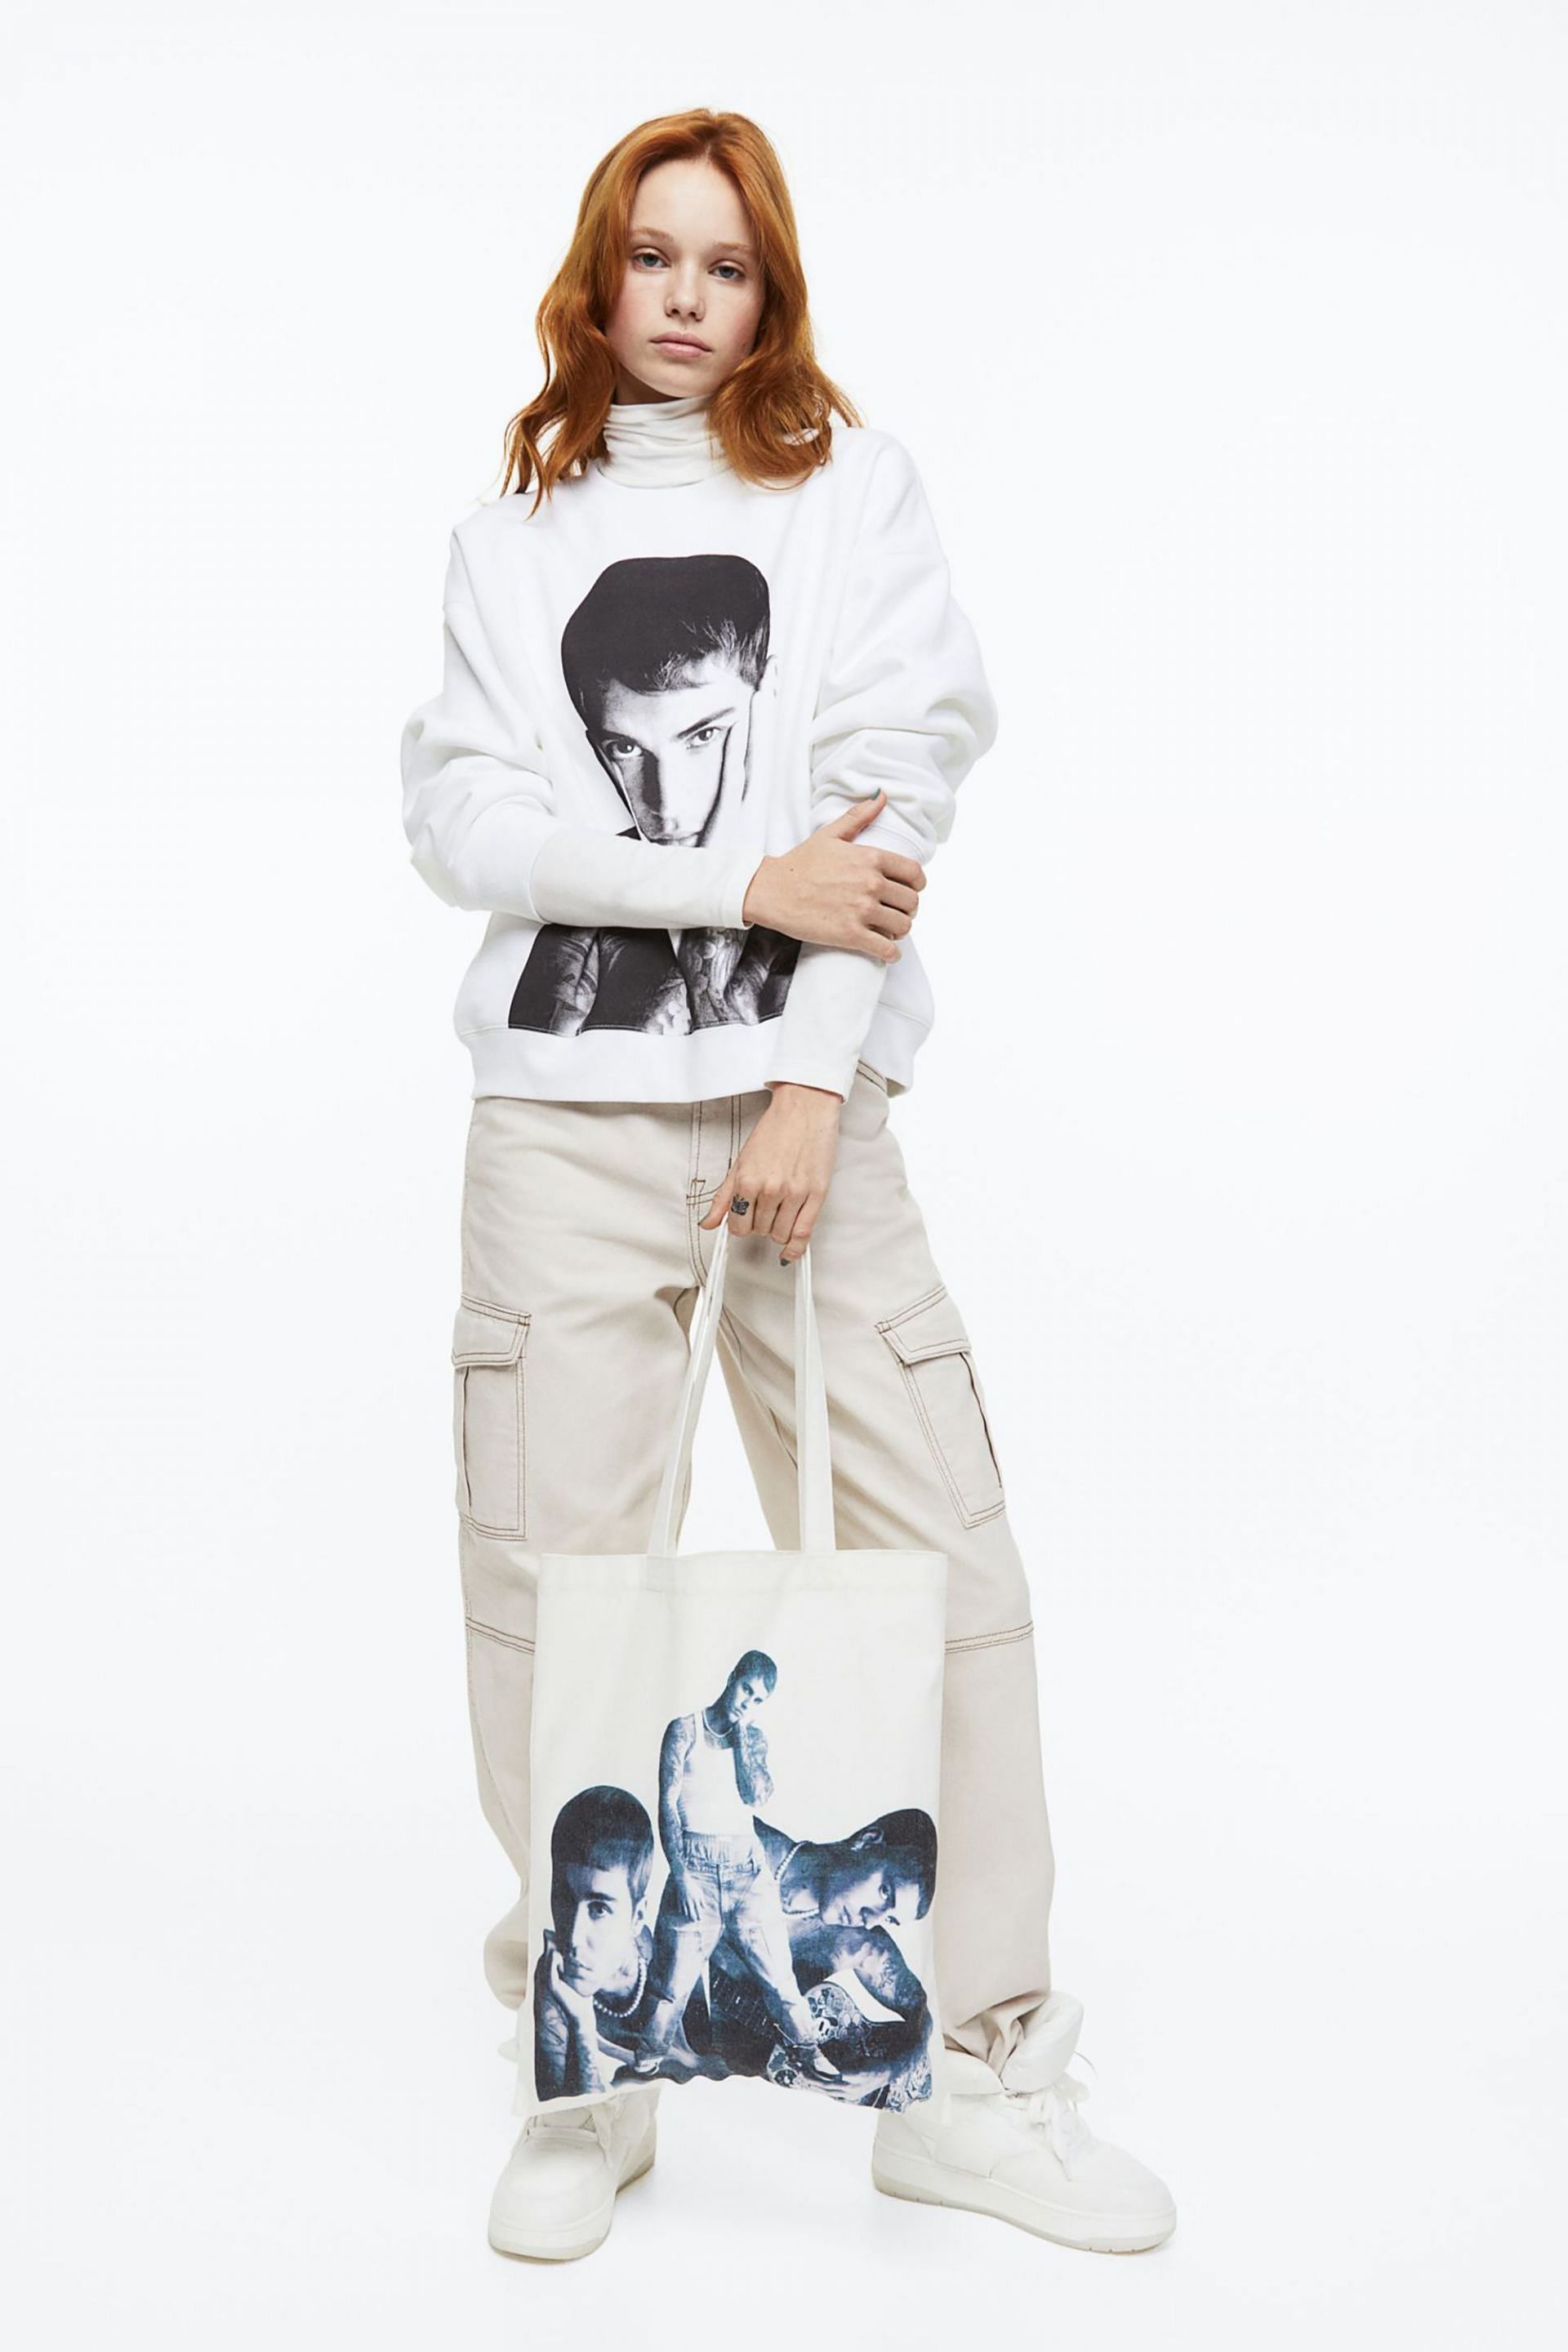 H&amp;M released a sweatshirt and a bag with Justin Bieber&#039;s picture. (Image via H&amp;M)